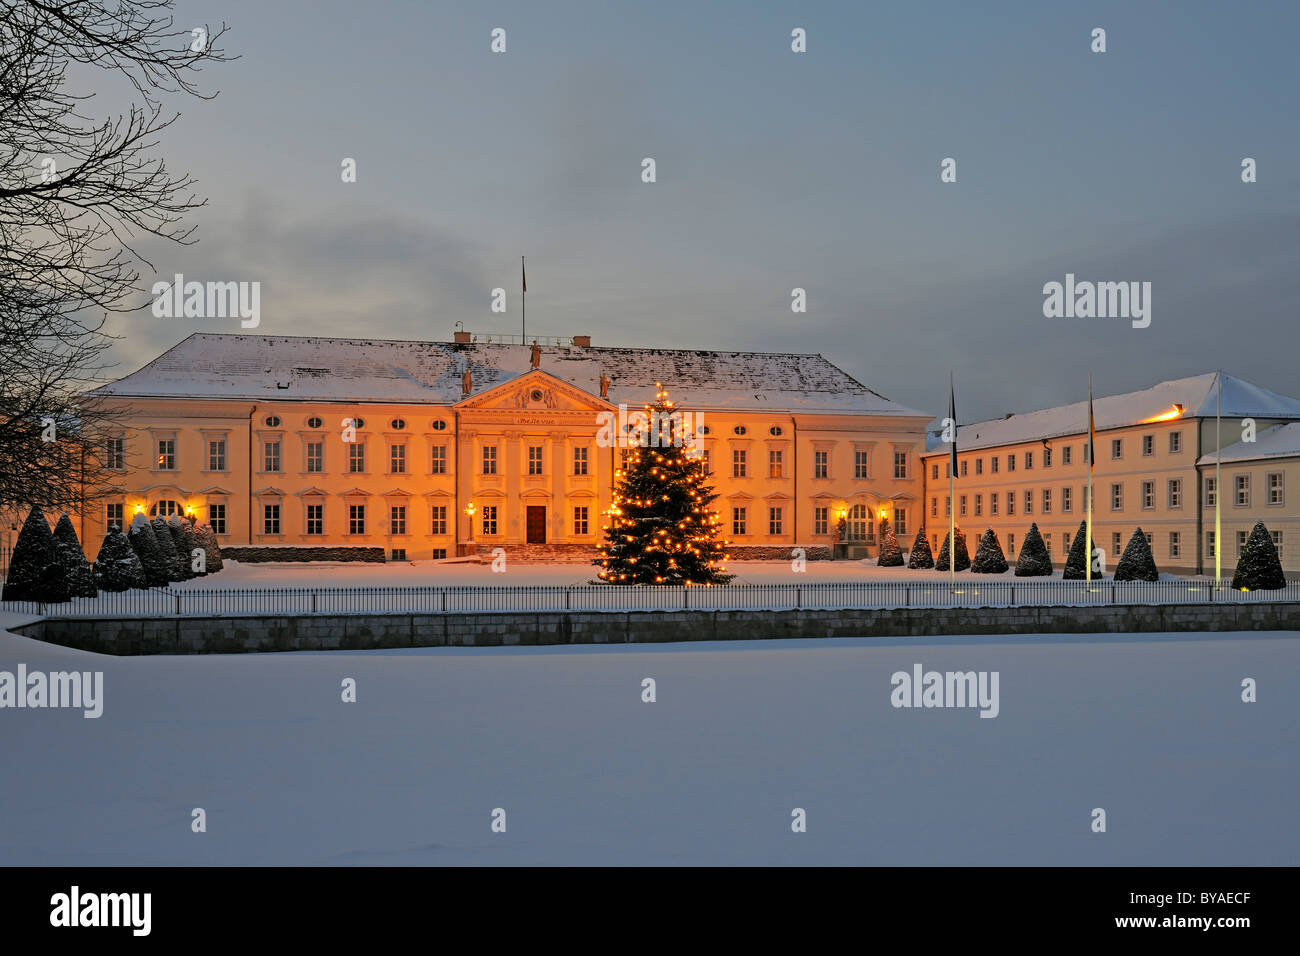 Bellevue Palace, residence of the German Federal President, with a Christmas tree at Christmas season, Berlin, Germany, Europe Stock Photo